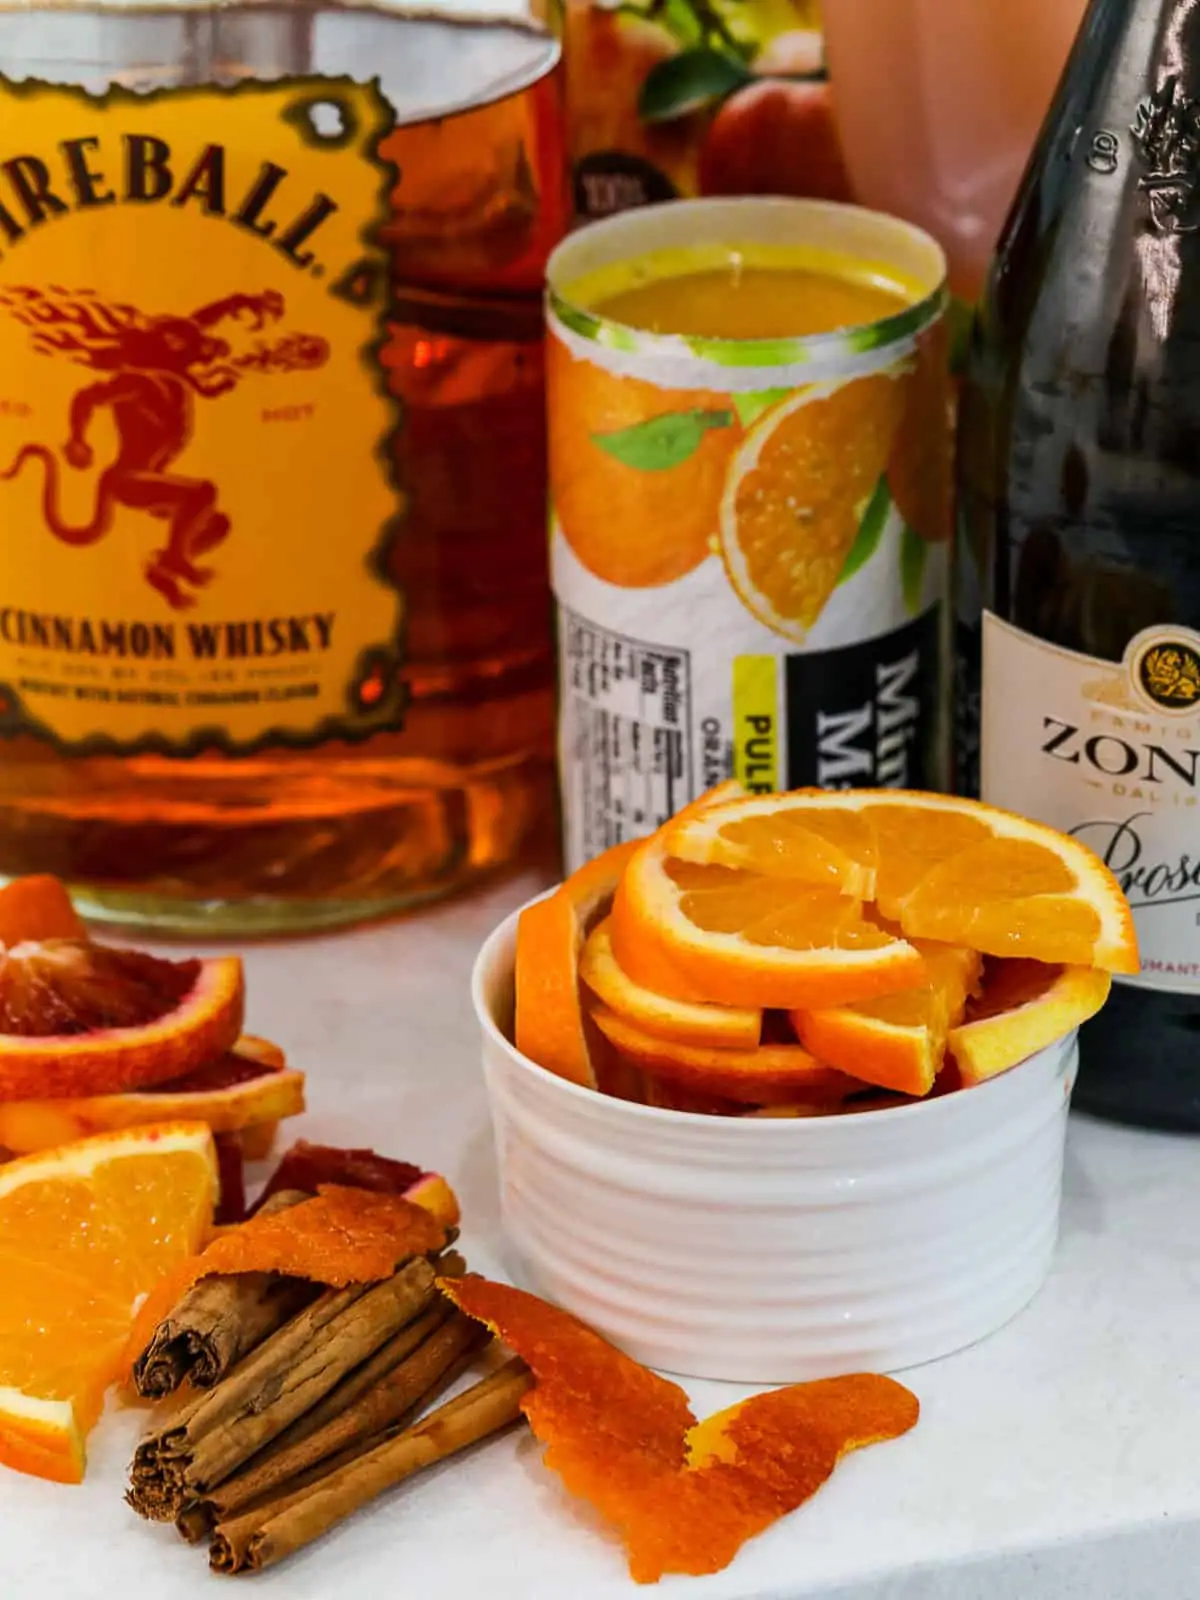 Ingredients to make Fireball punch; orange juice concentrate, Prosecco, Fireball Whisky, and apple cider.